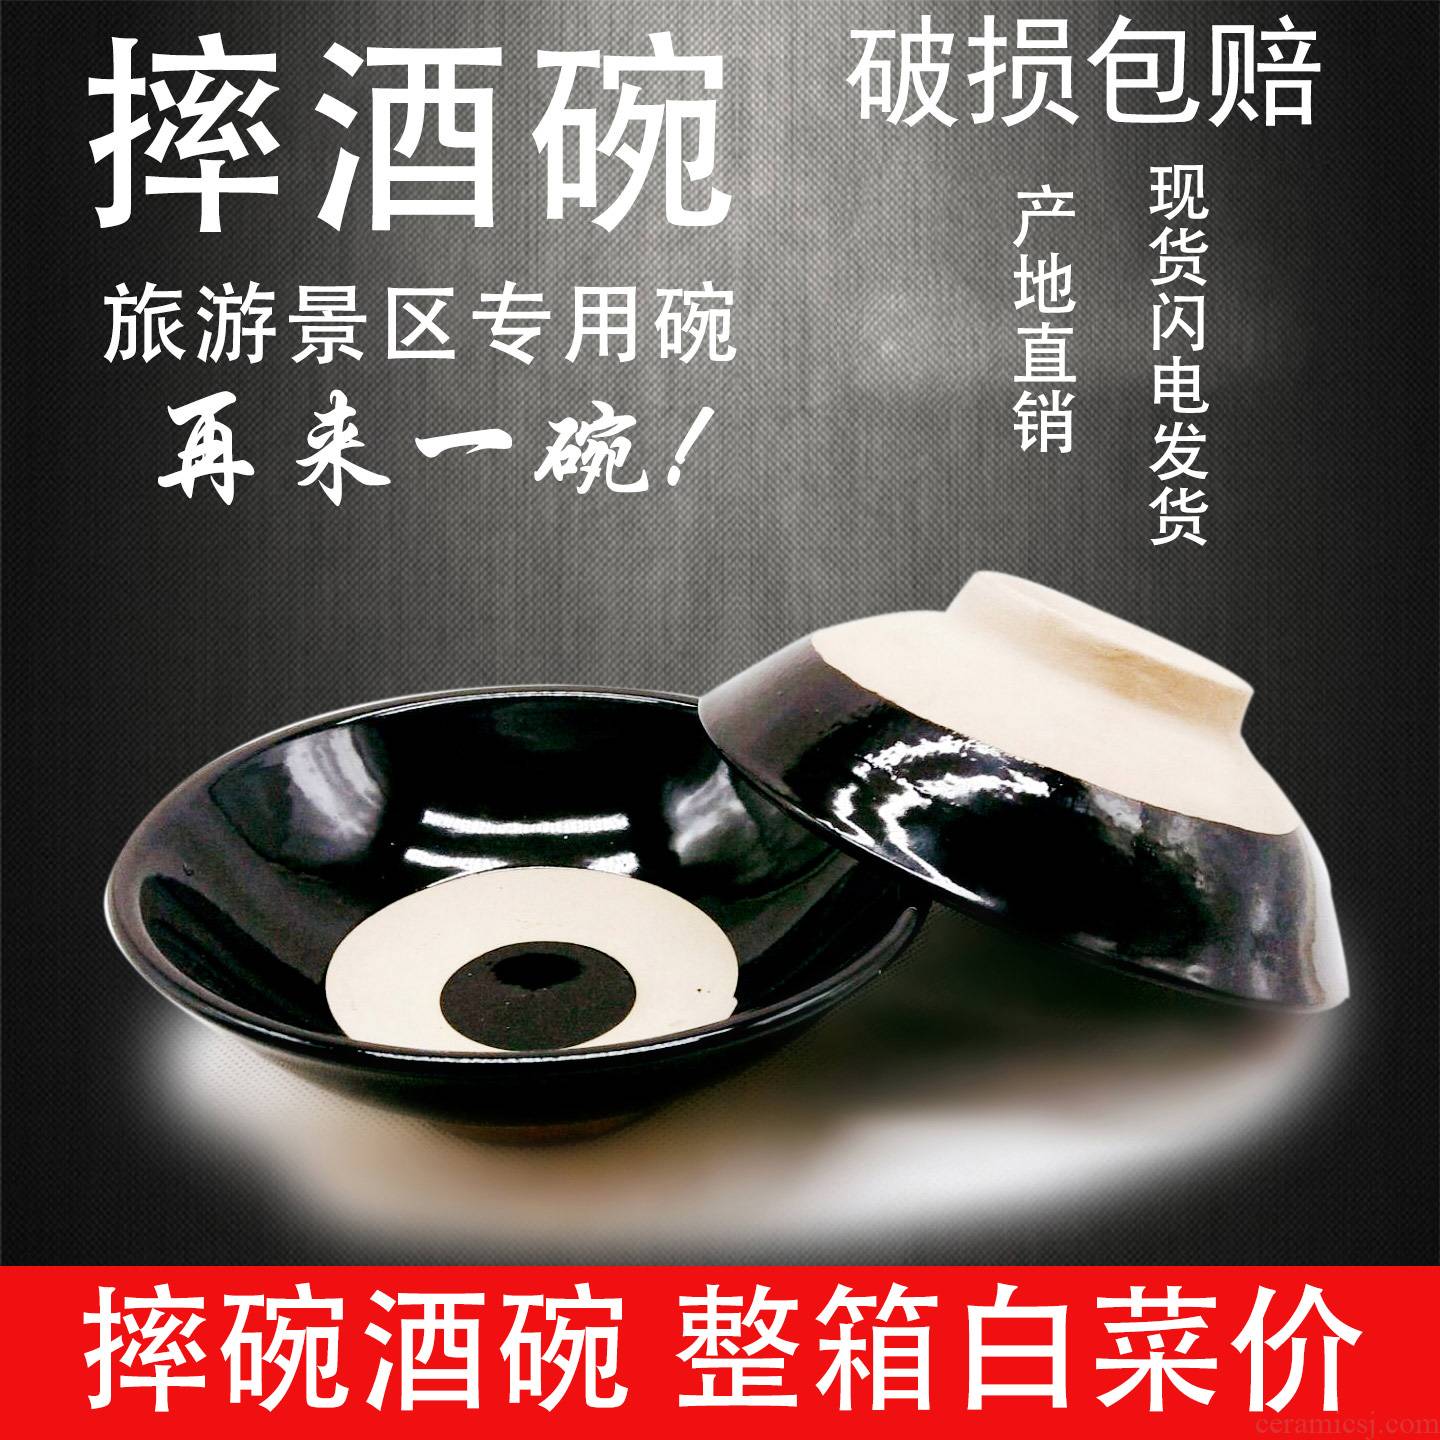 Wine steaming bowl of old earthenware bowl of archaize soil bowl of hot pot dish bowl of dip barbecue pork with coarse pottery bowl bowl of a beggar fell and Wine